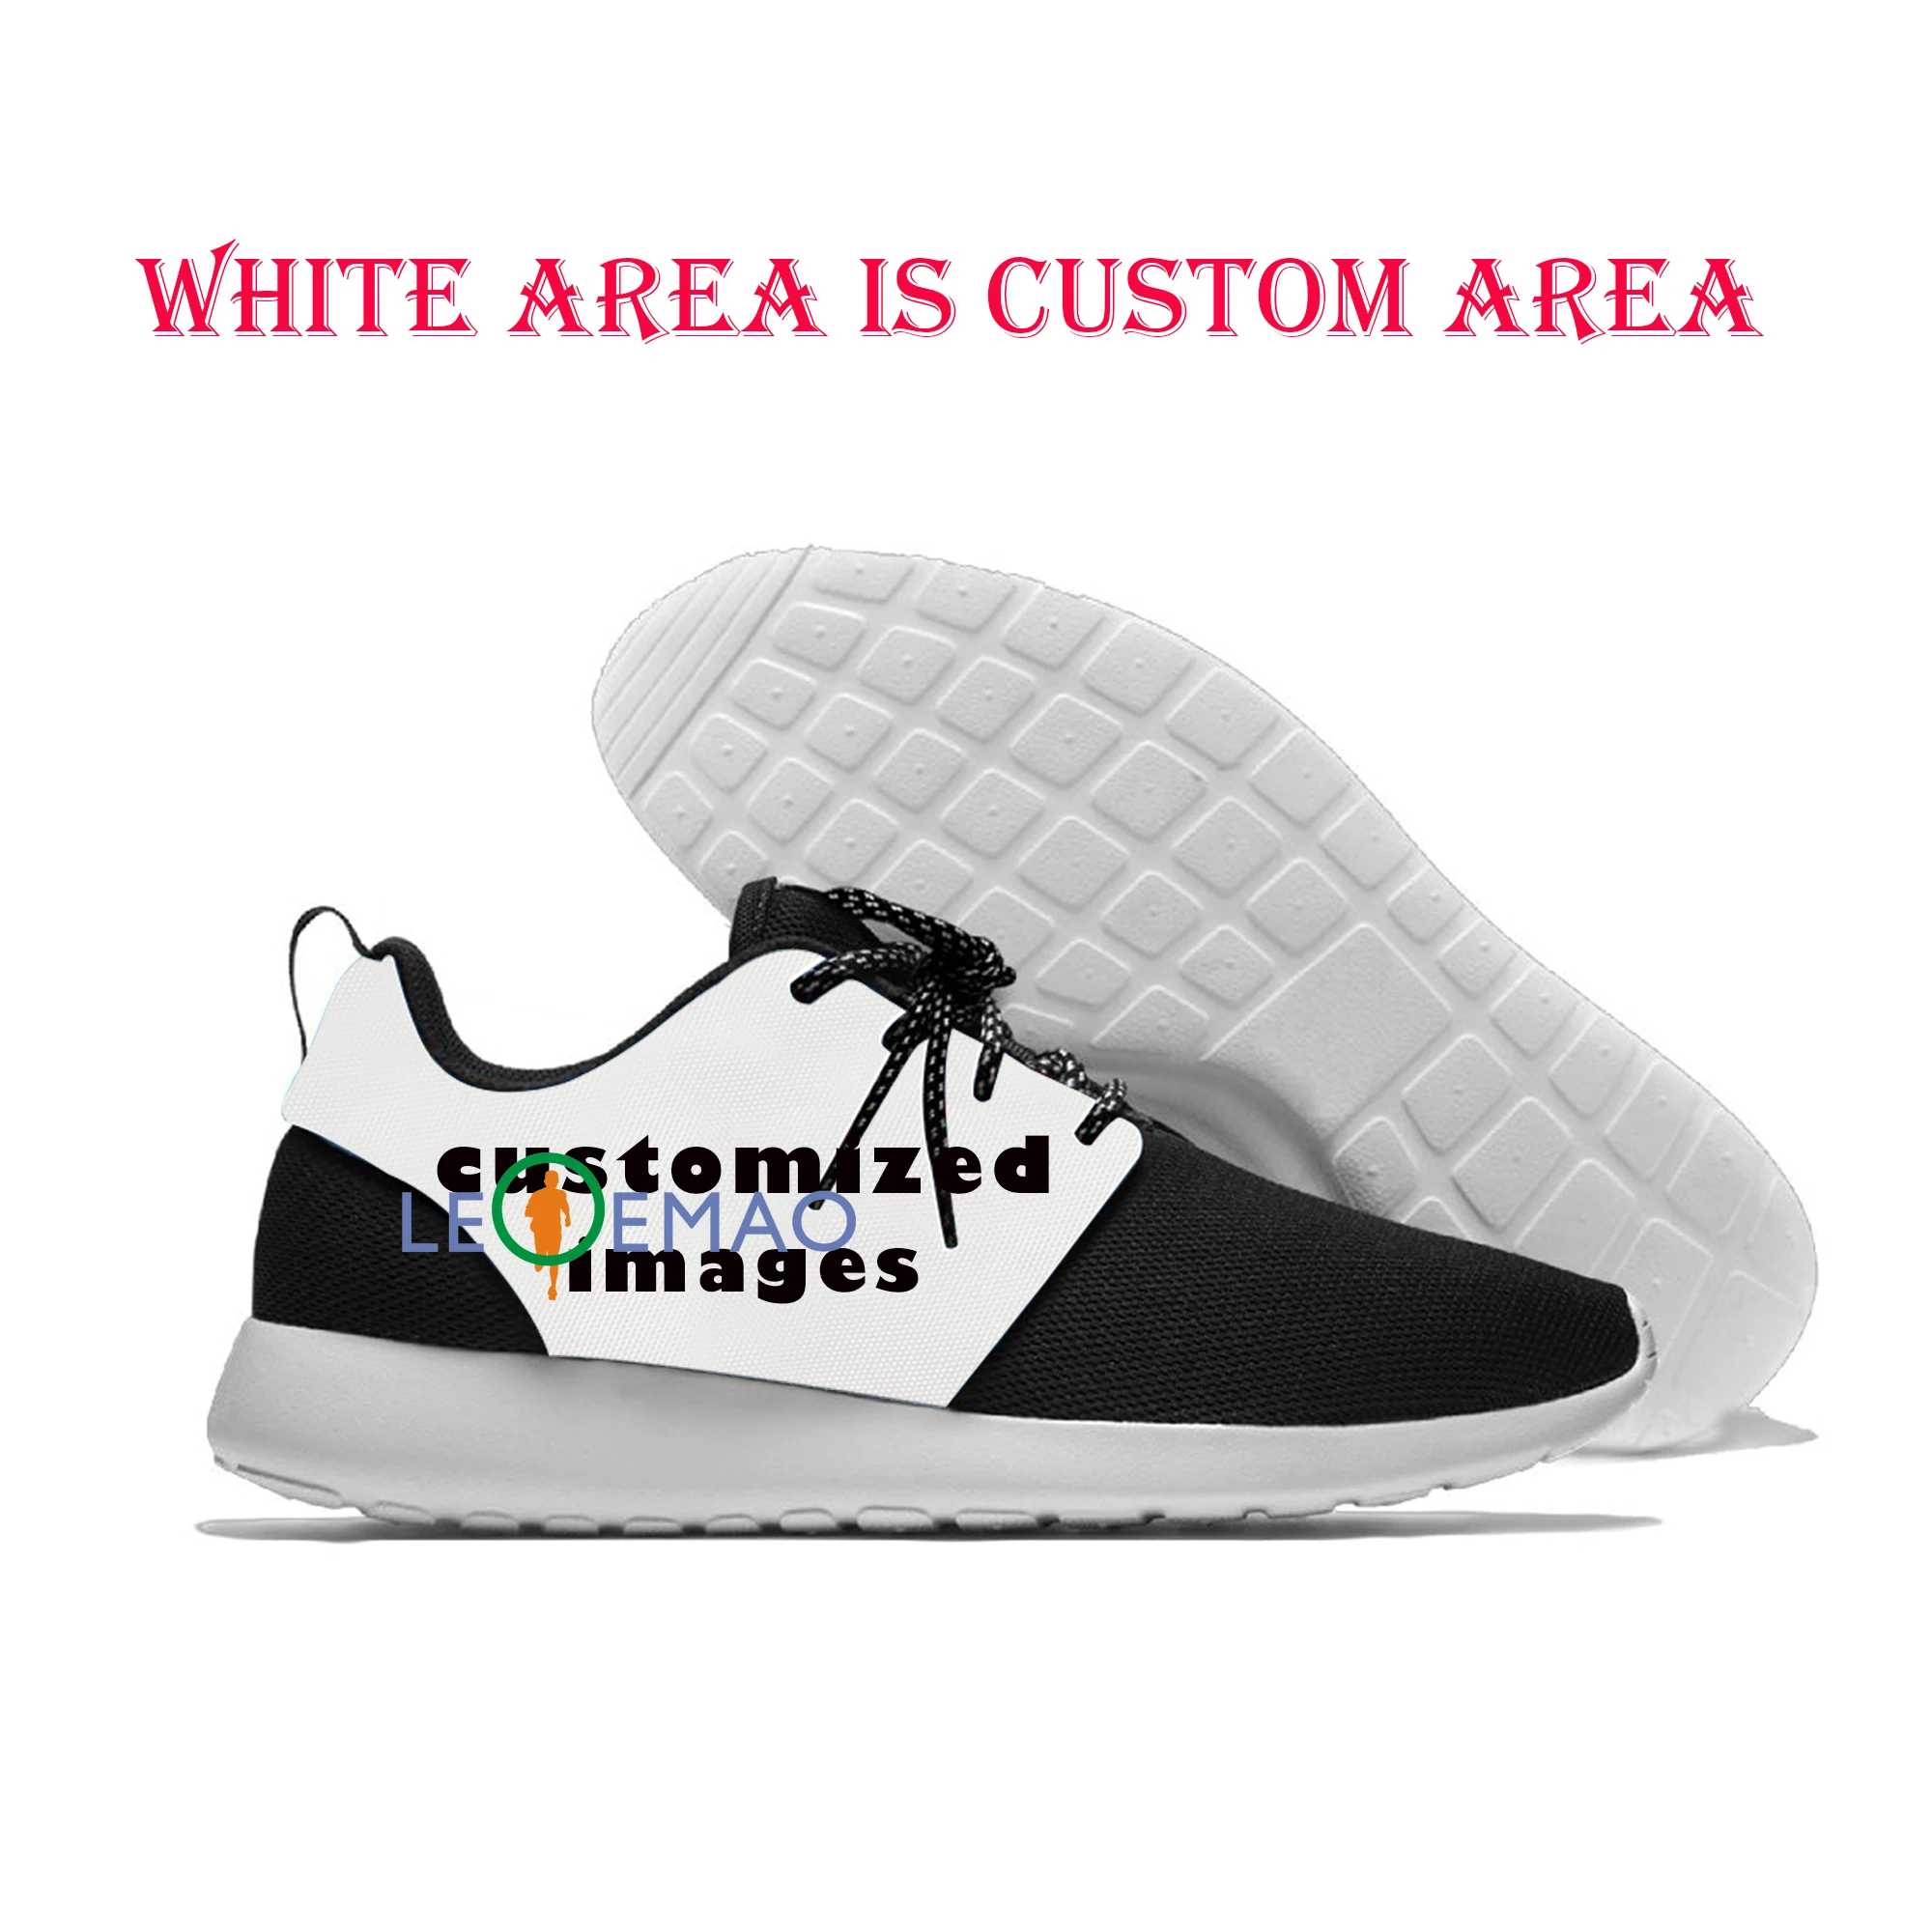 

Free Running For Men Raffaello Santi Casual Shoes Breathable Walking Shoes Jogging Walking Sports Athietic Breathable Sneakers